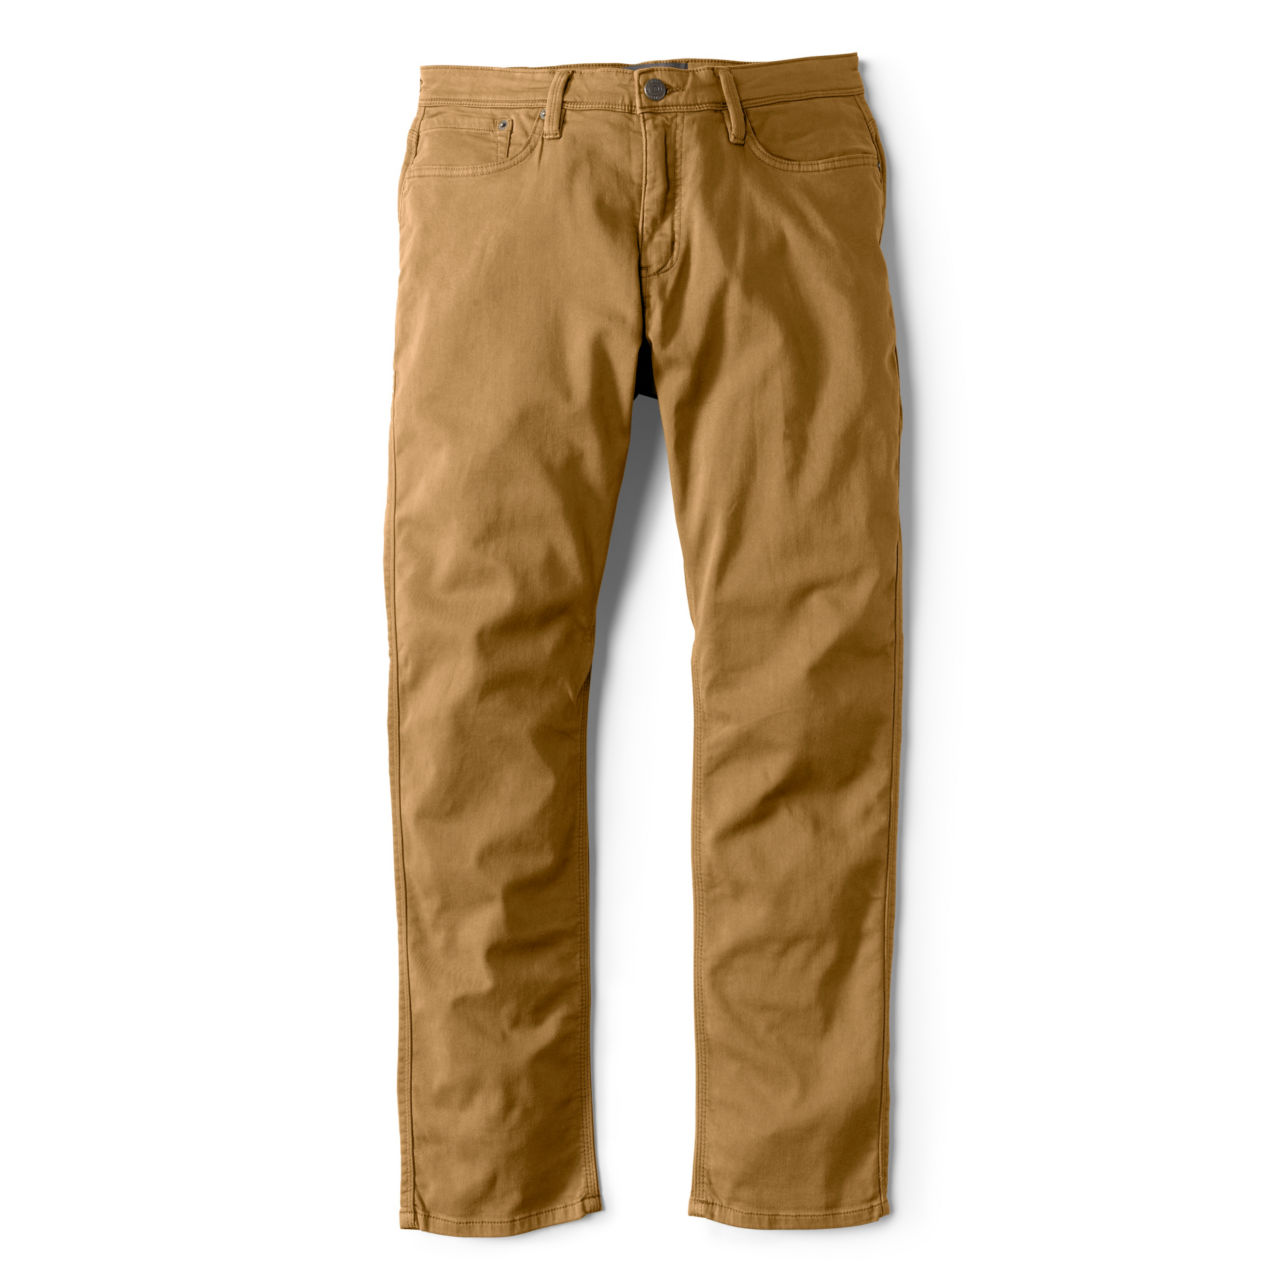 DUER™ No Sweat Pants - TOBACCO image number 0